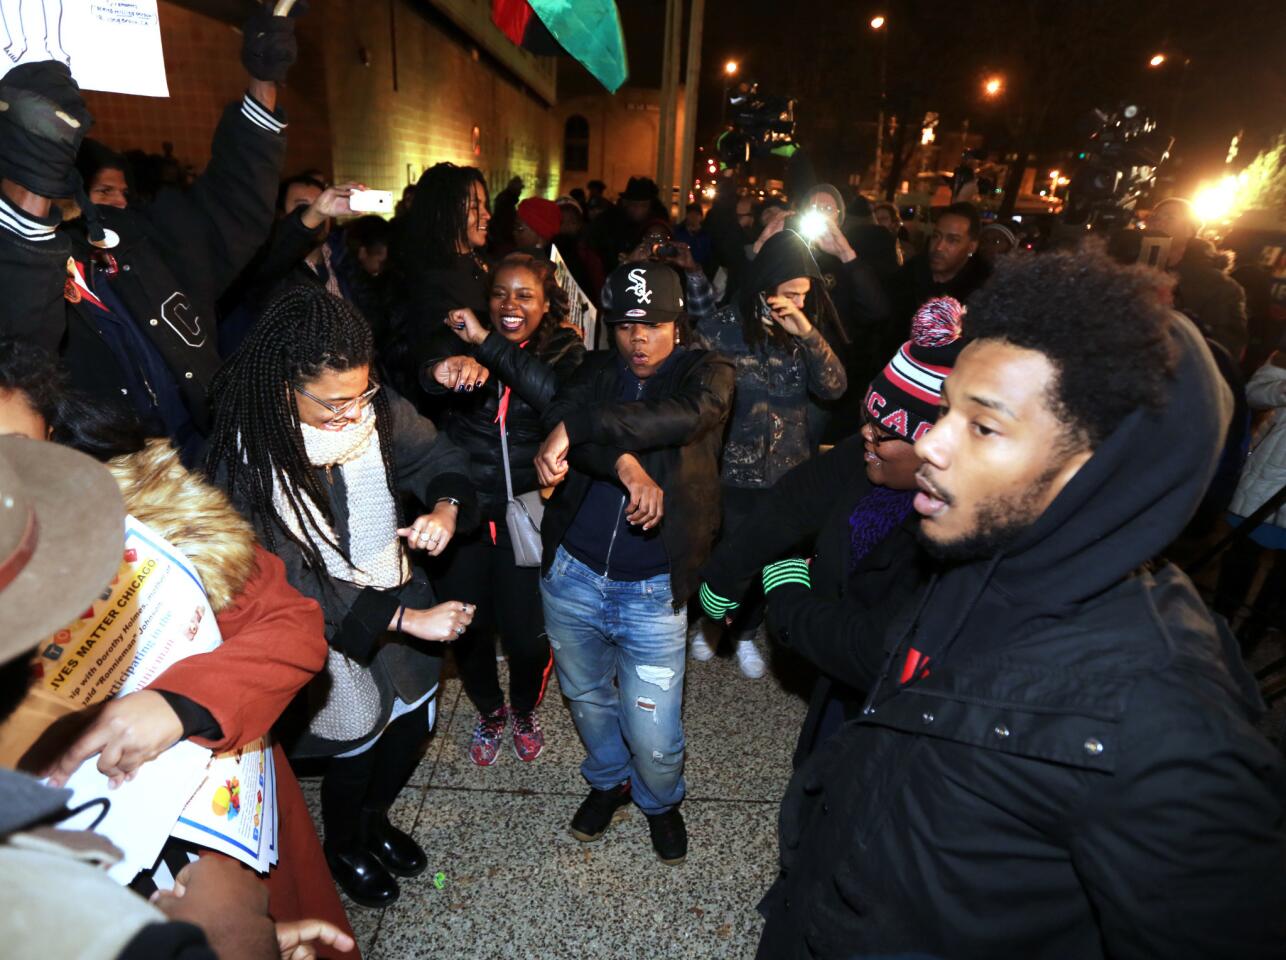 Protesters and activists celebrate outside Chicago police headquarters, on South Michigan Avenue at 35th Street, on Dec. 1, 2015, hours after Chicago Mayor Rahm Emanuel asked for and accepted the resignation of police Superintendent Garry McCarthy.